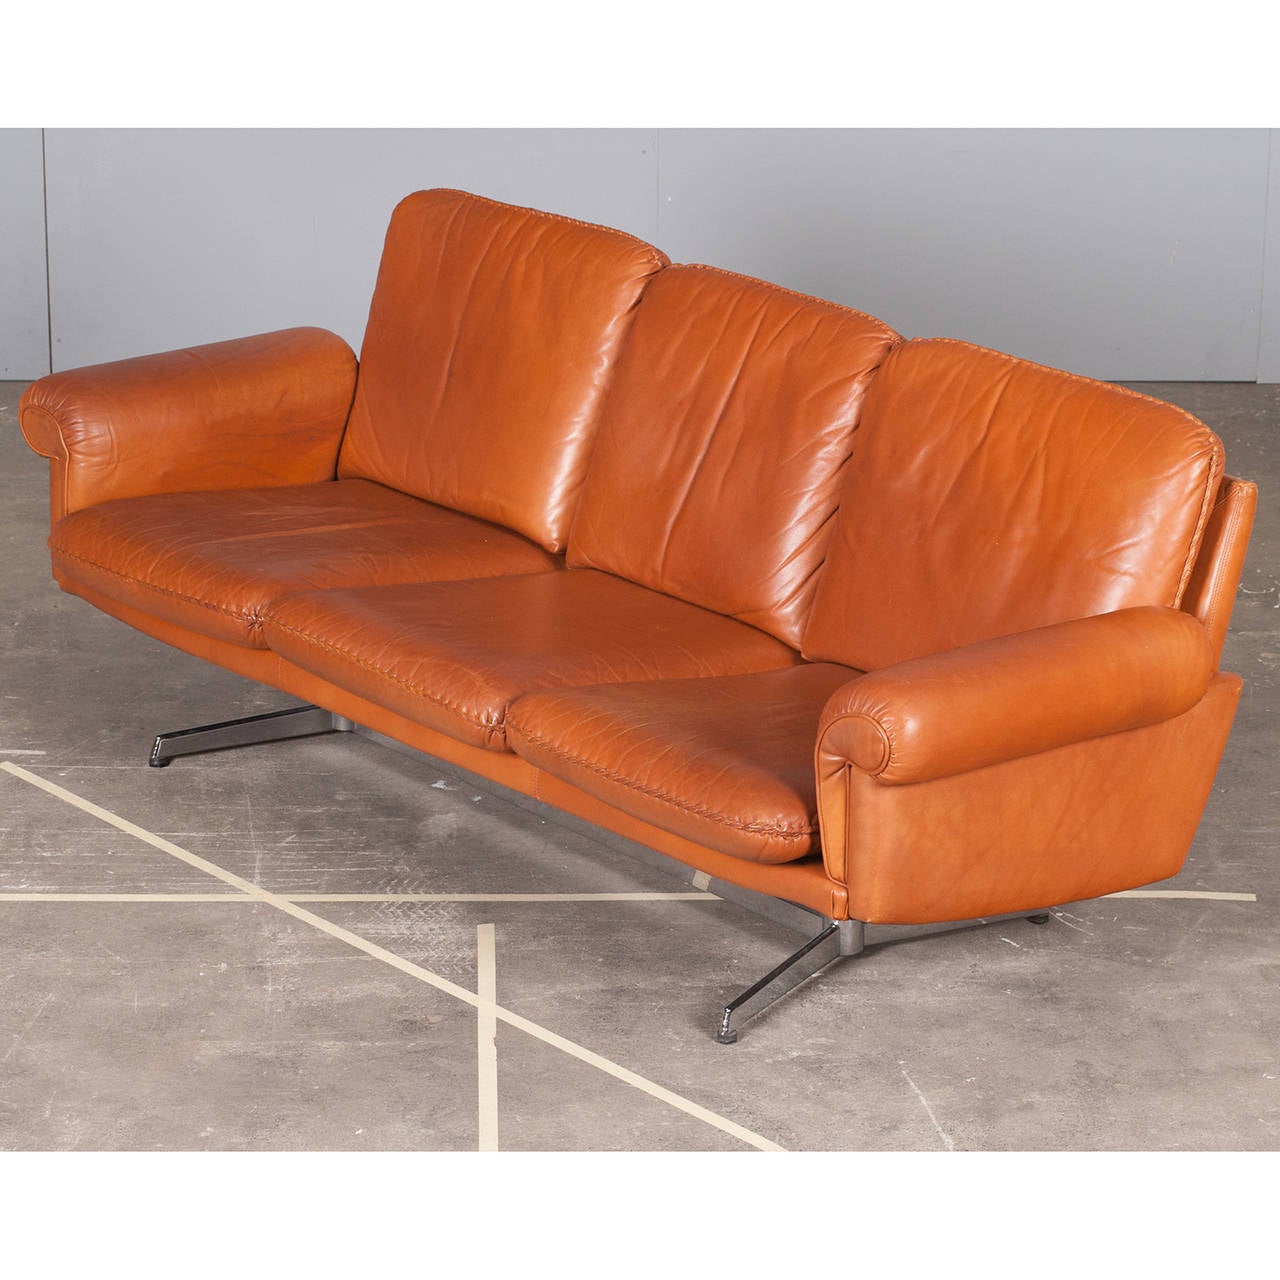 Mid-Century Modern Swiss Three-Seater Sofa in Caramel Leather with Steel Base by De Sede, 1960s For Sale